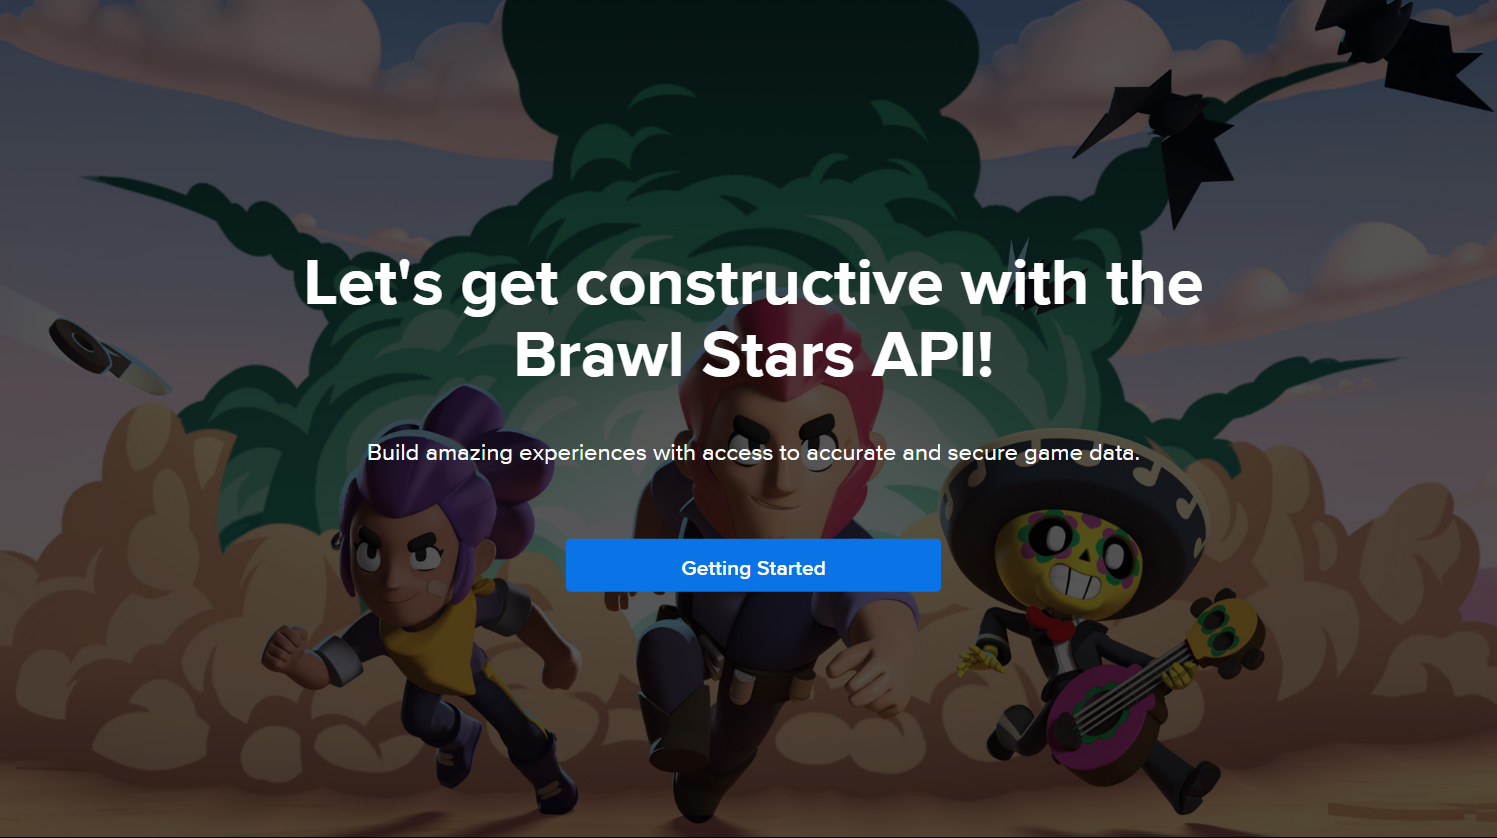 Cover photo for my Brawl Stars Tracker project